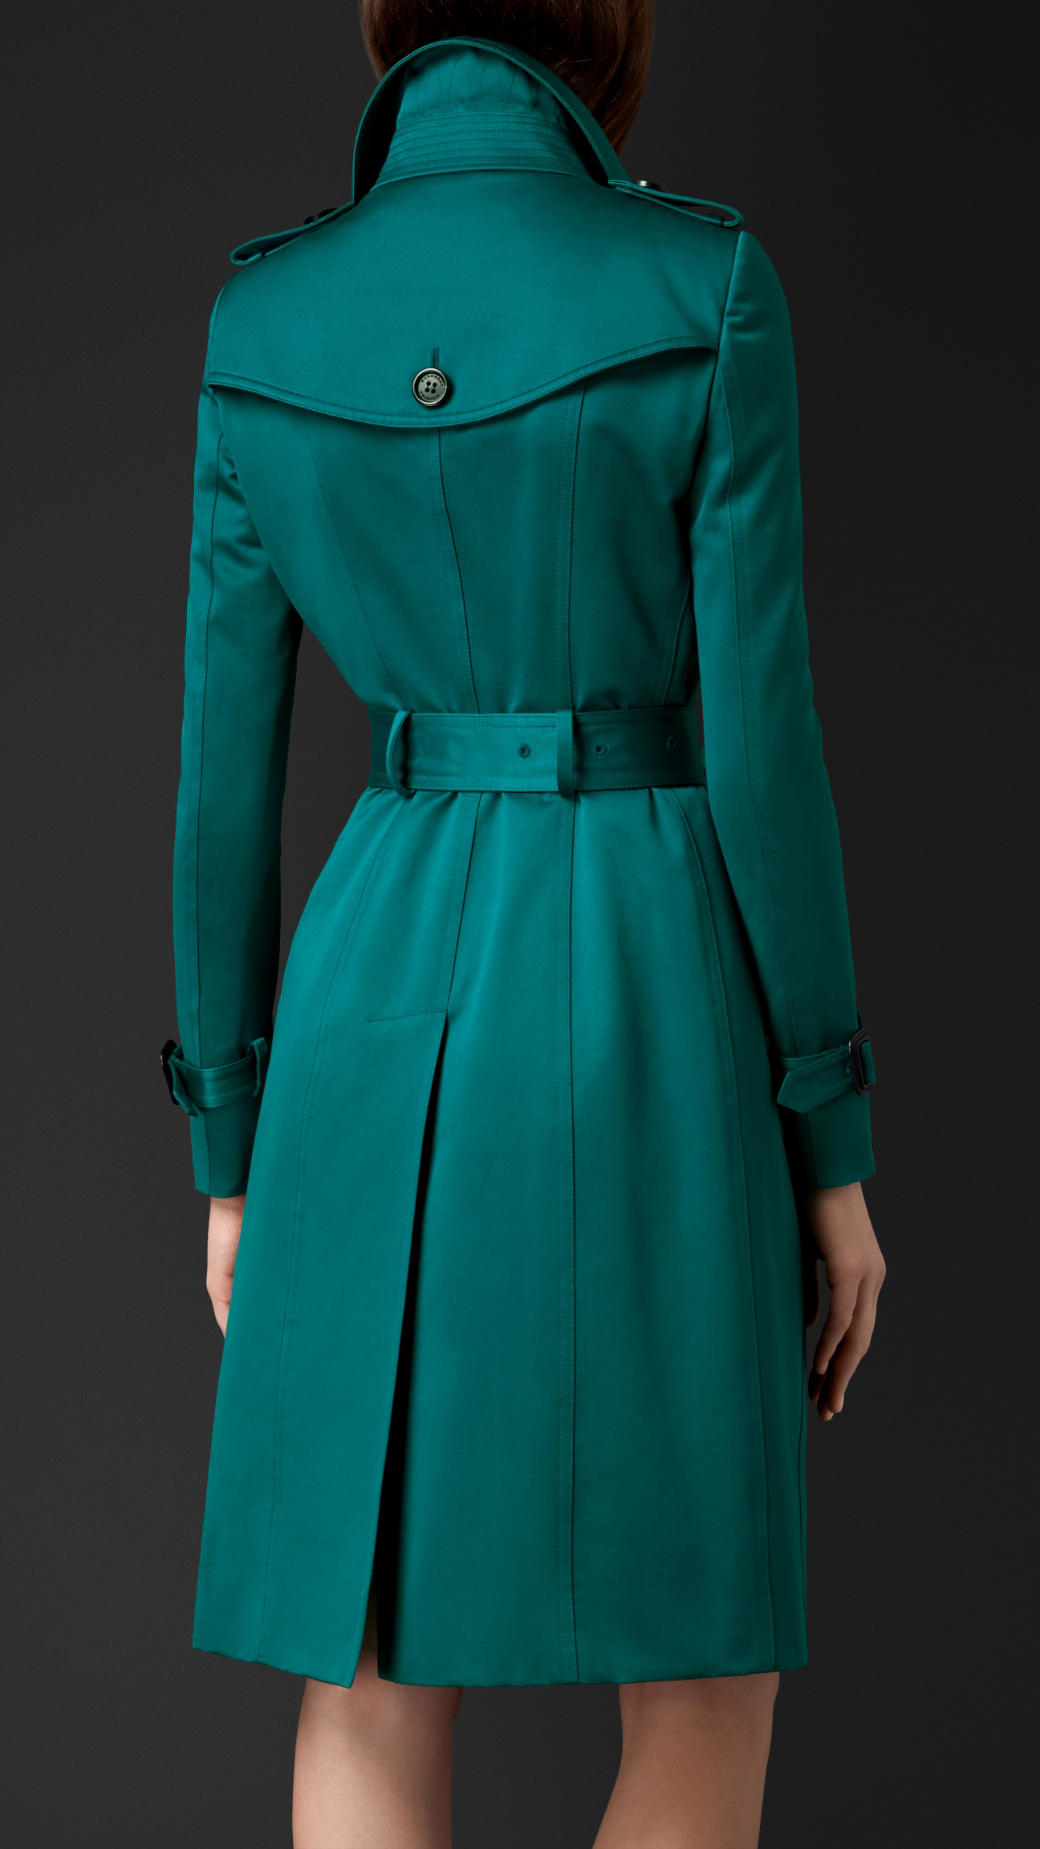 Burberry Cotton Sateen Trench Coat in Bright Teal (Blue) - Lyst